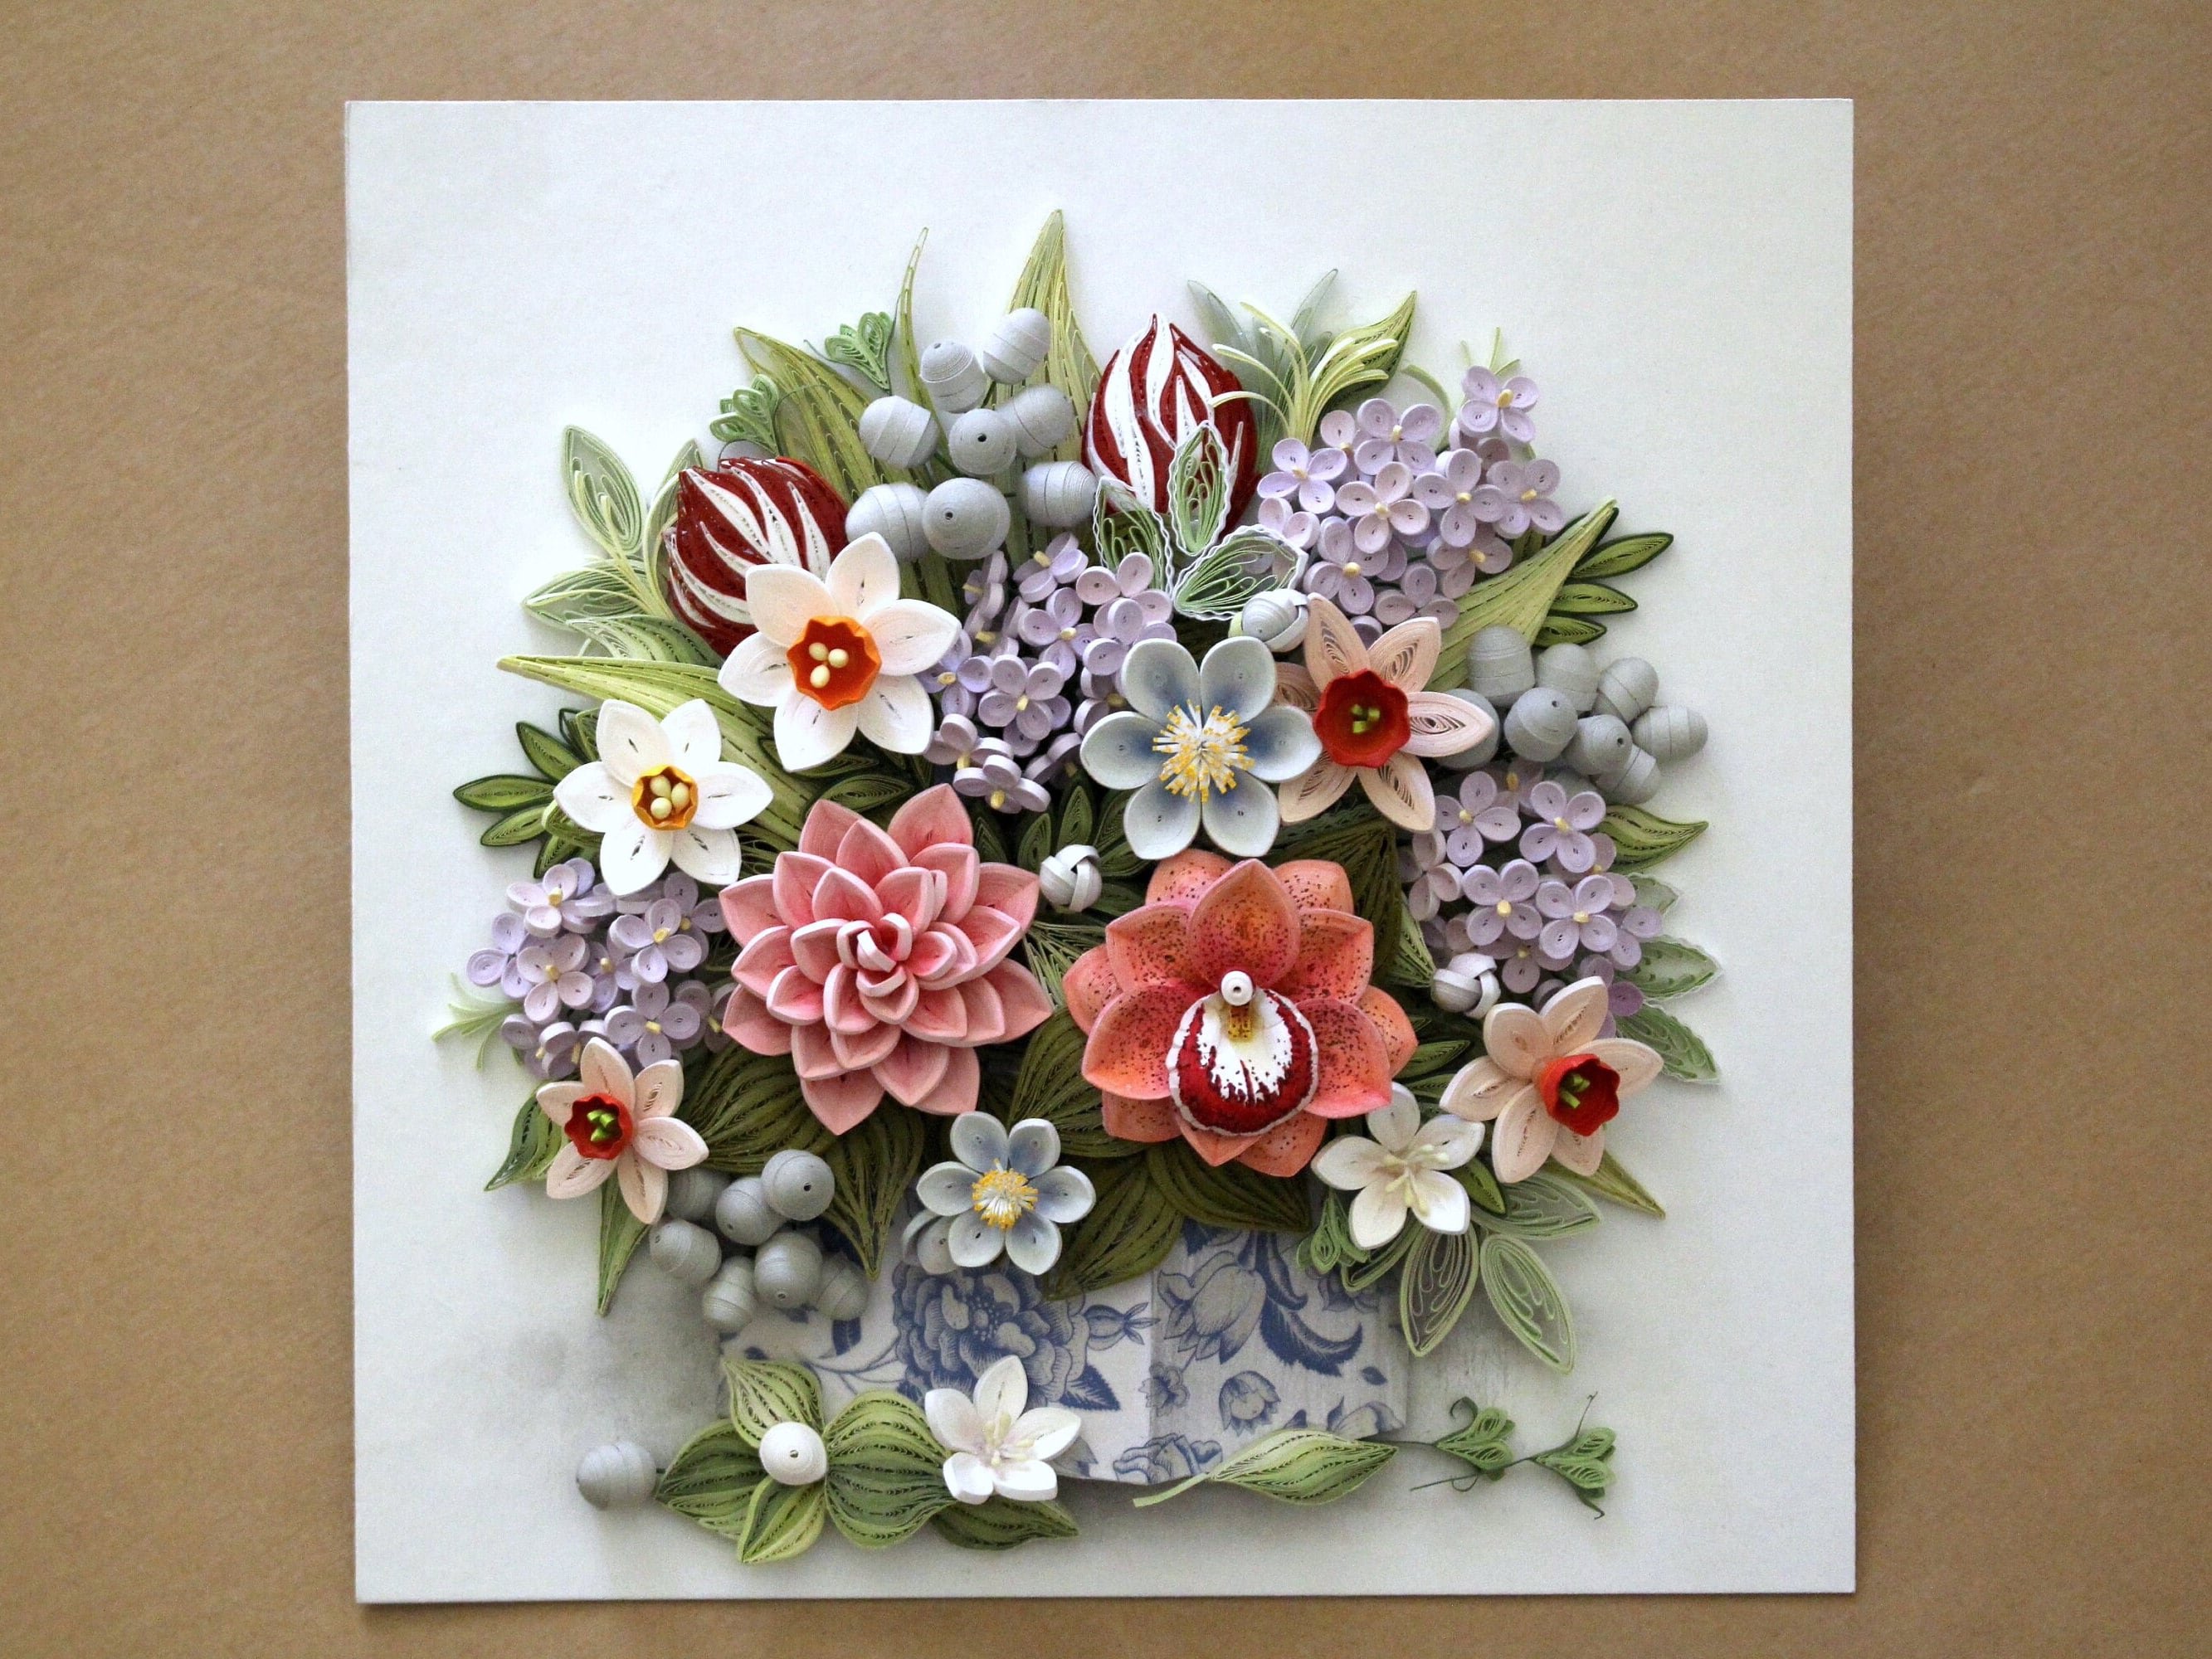 Steps to become an expert at the art of paper quilling